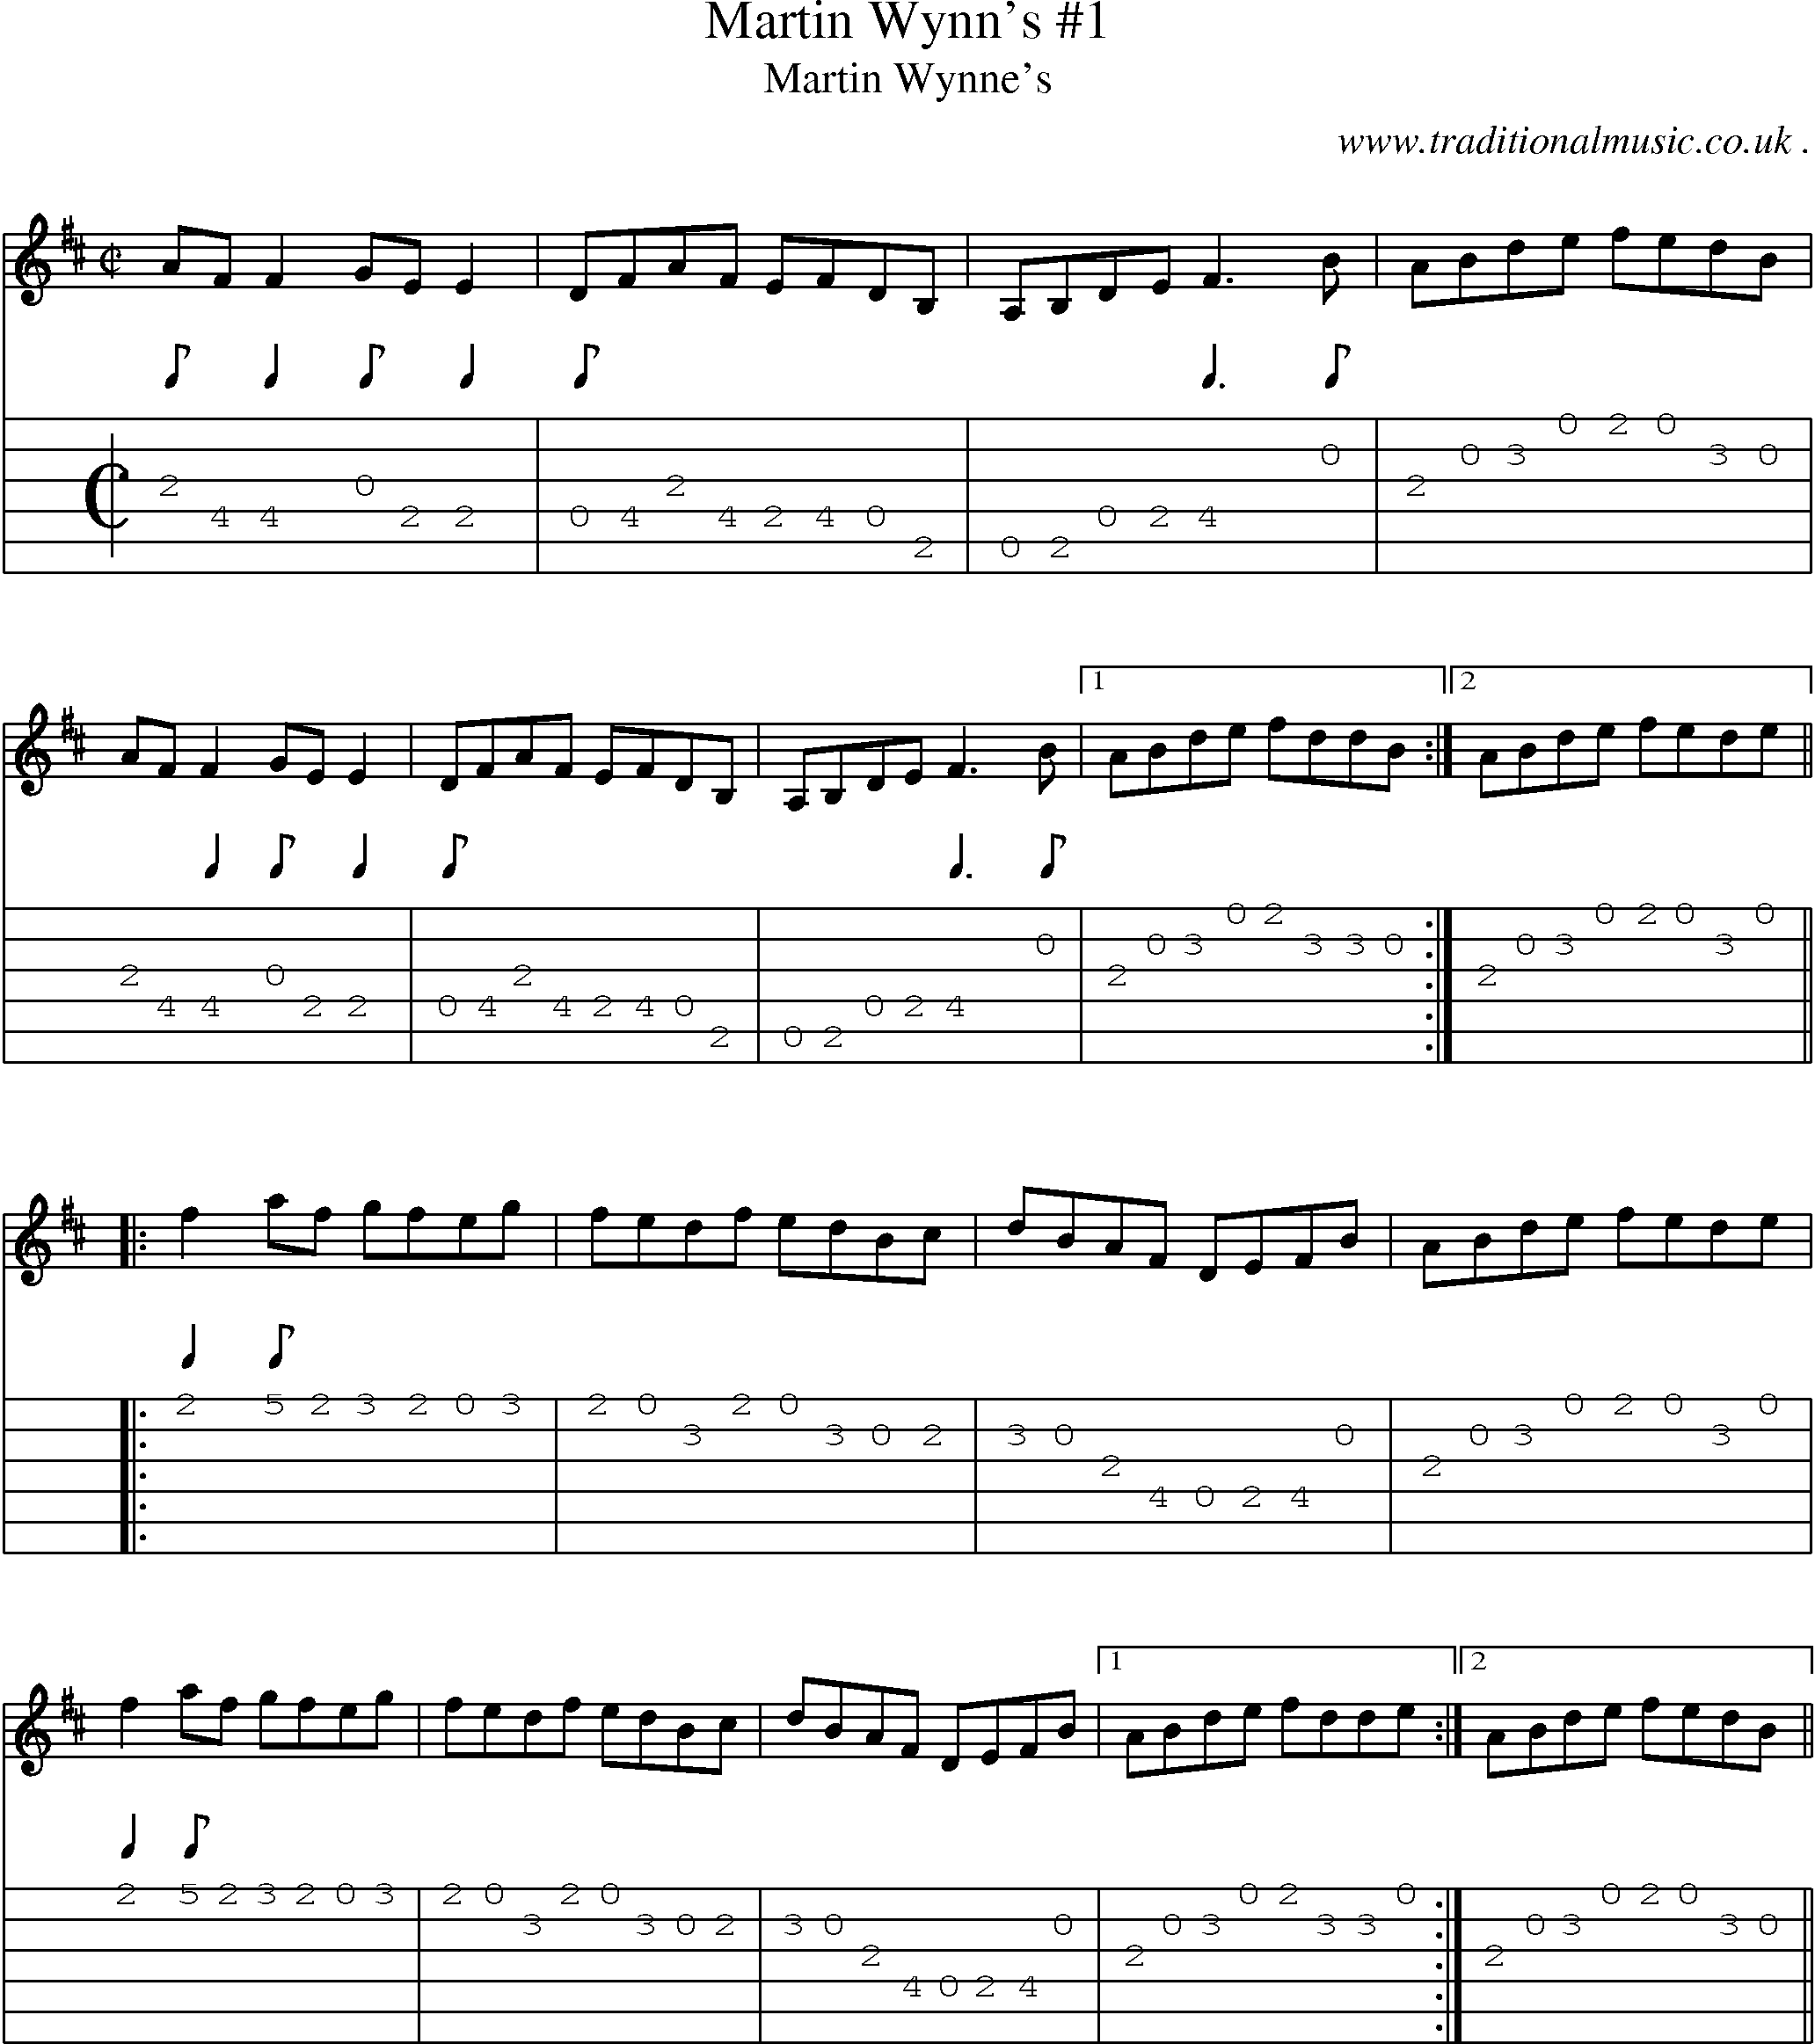 Sheet-Music and Guitar Tabs for Martin Wynns 1